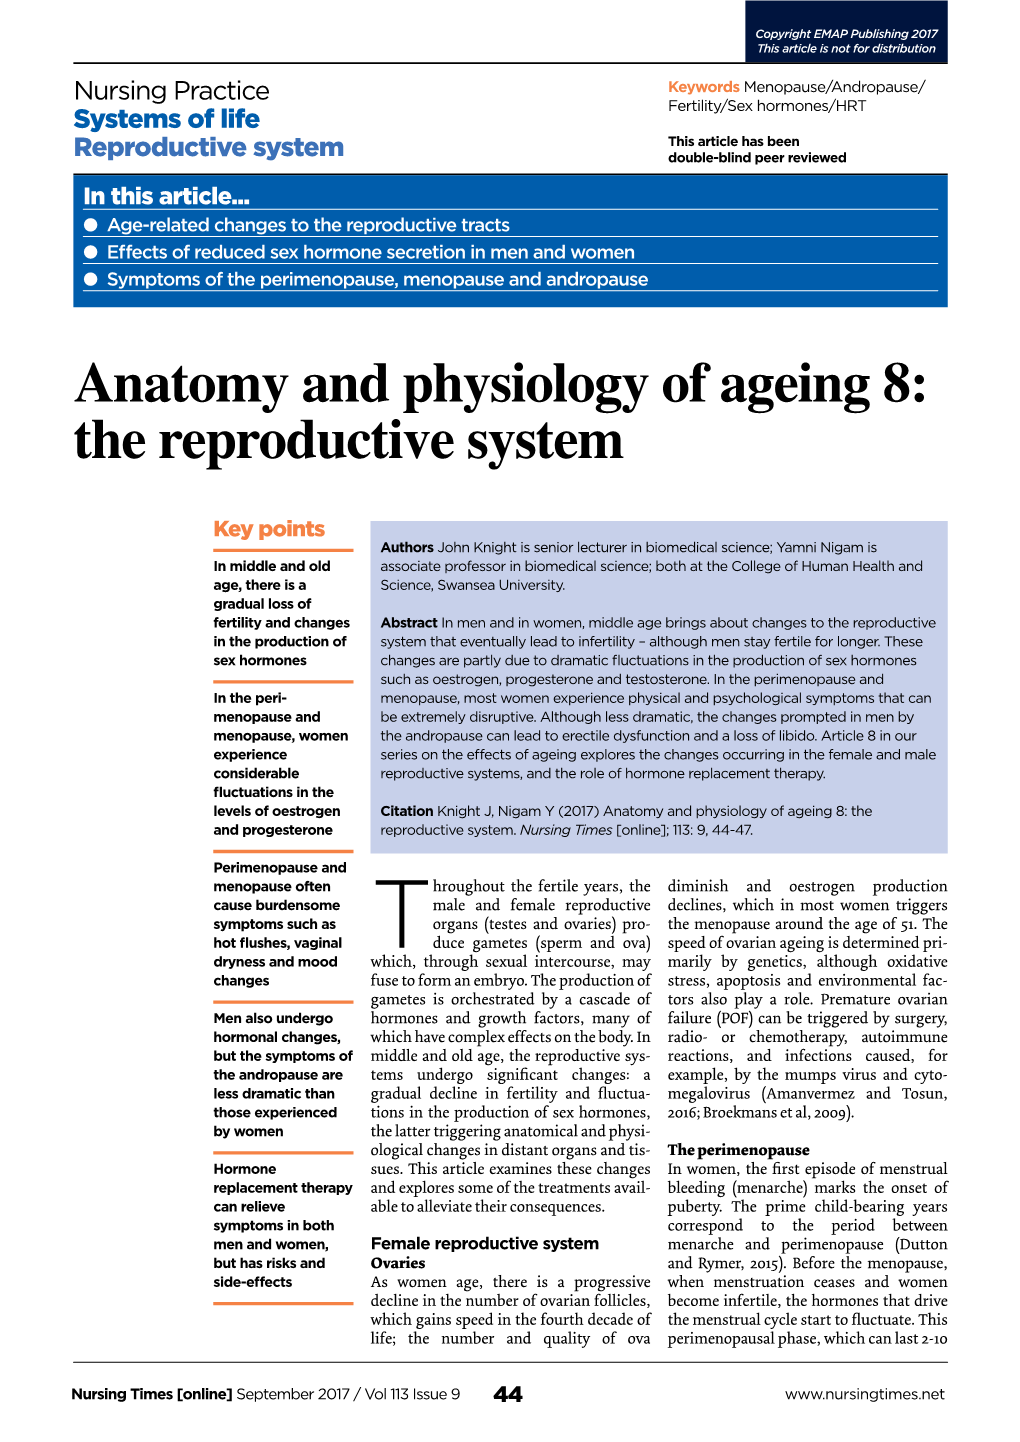 Anatomy and Physiology of Ageing 8: the Reproductive System